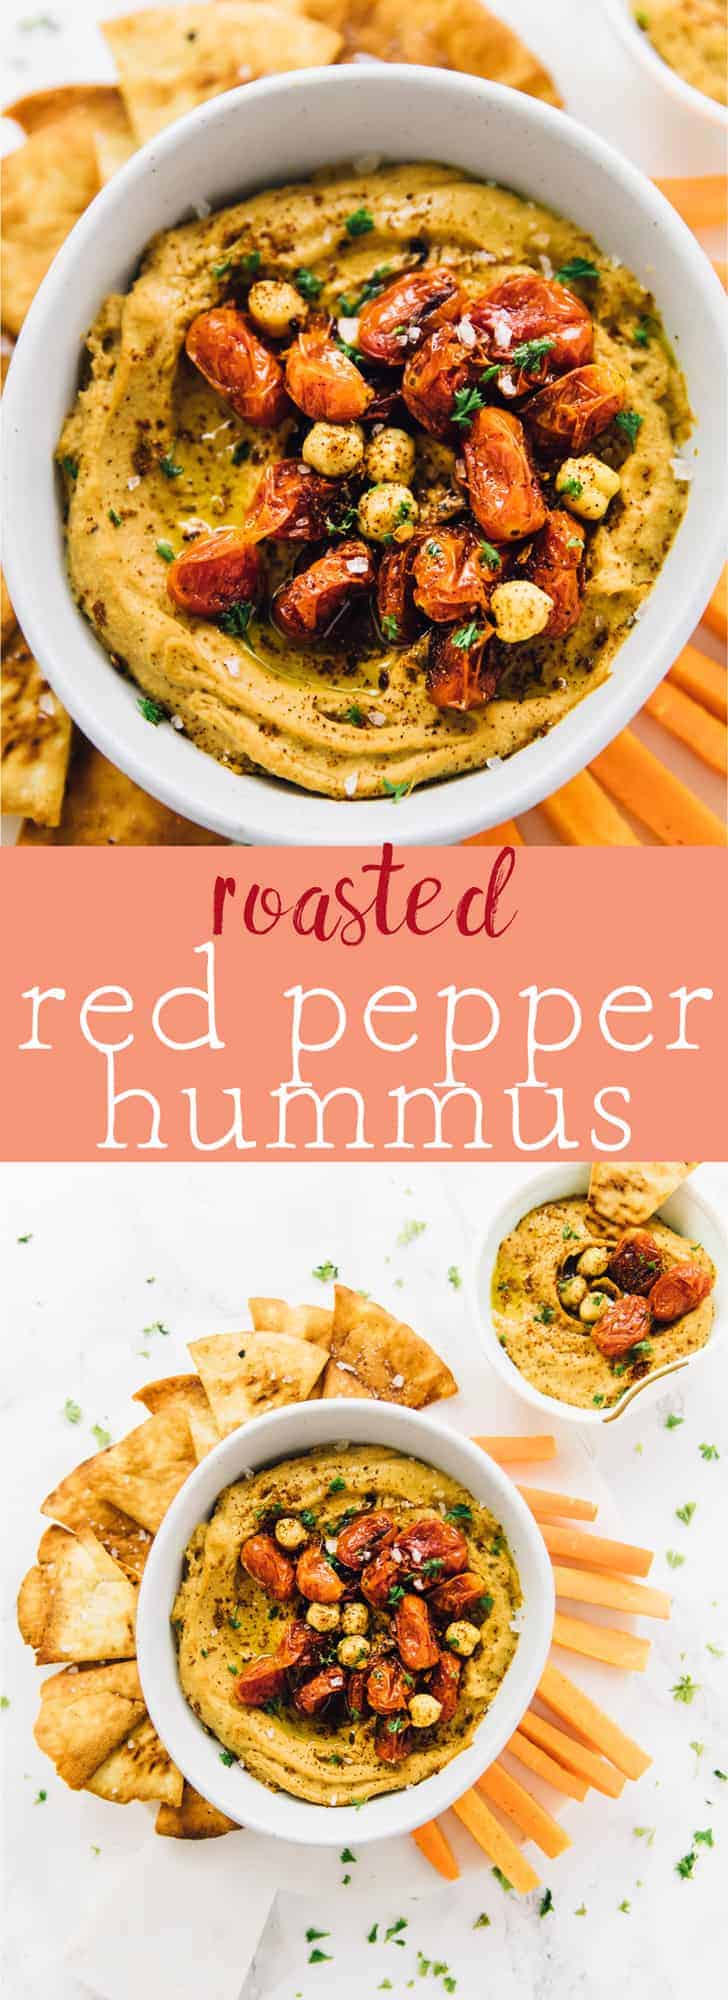 This Spicy Roasted Red Pepper Hummus is so creamy and smooth! It's given a nice spicy kick thanks to Harissa, and tastes amazing as a dip or as a spread on anything! via https://jessicainthekitchen.com 